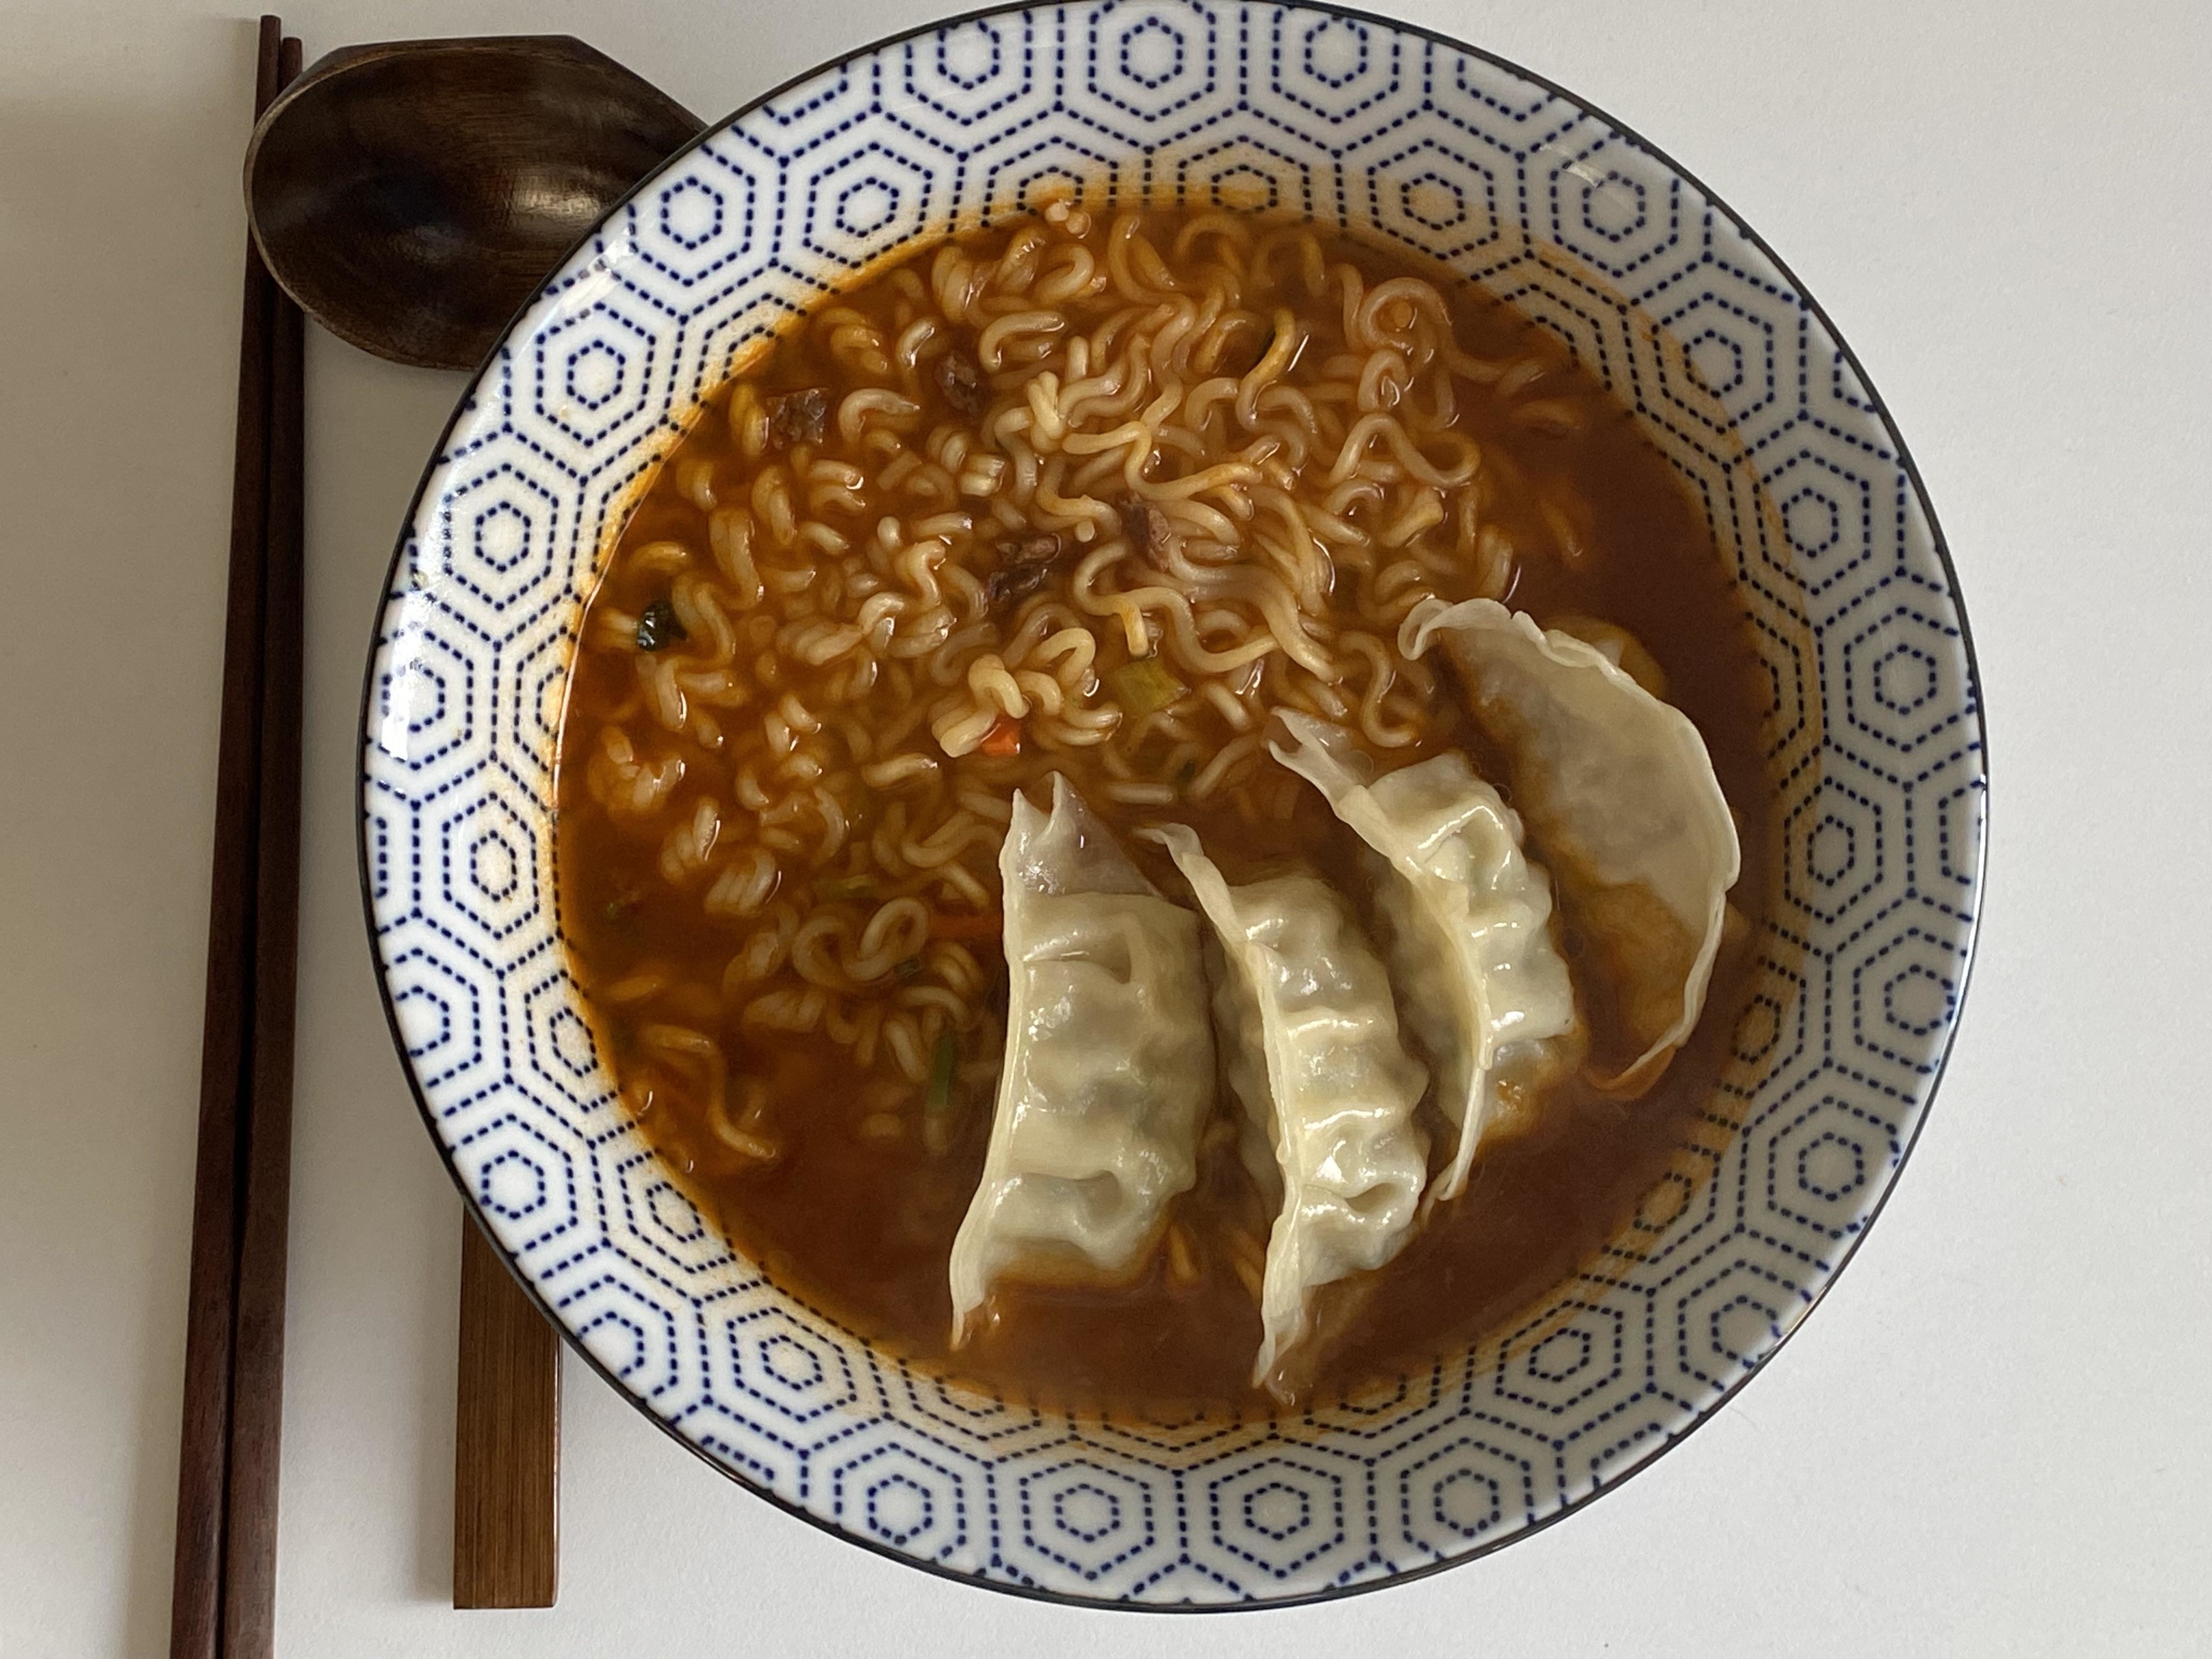 Bowl of ramen with three dumplings and a wooden spoon on a patterned border plate